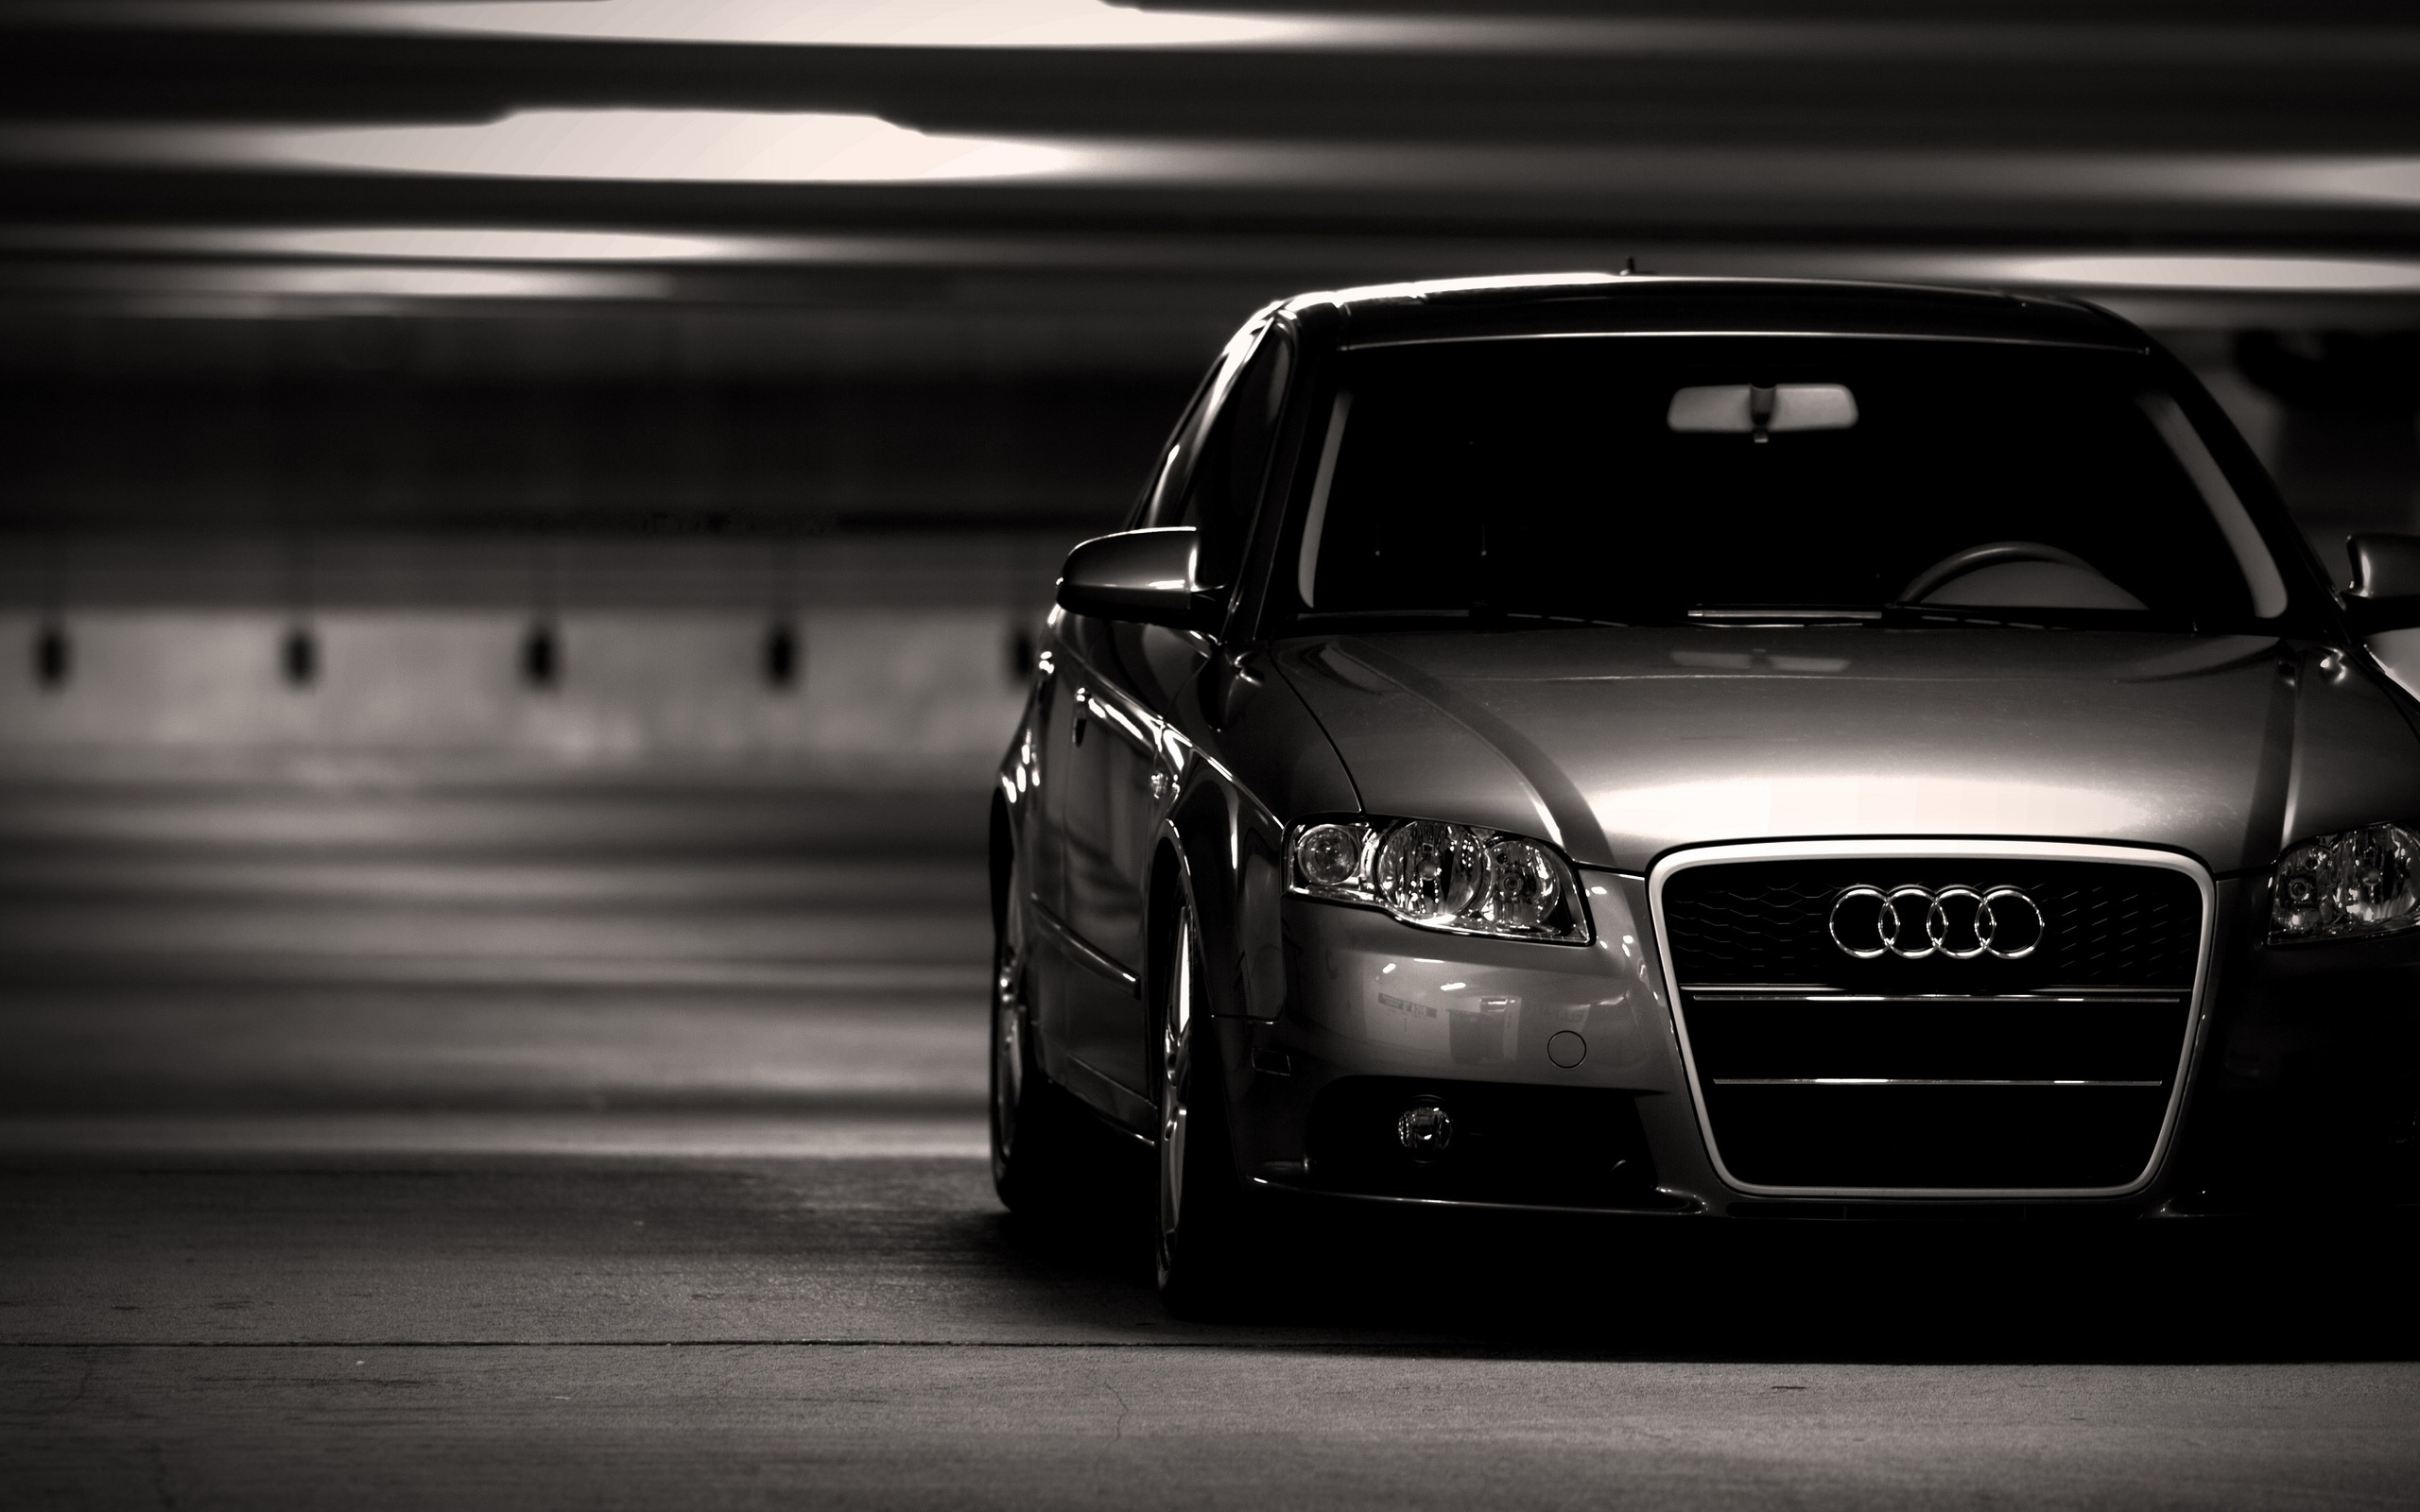 Free Download Audi A4 Hd Wallpapers Backgrounds 2560x1600 For Your Desktop Mobile Tablet Explore 47 Audi A4 Wallpaper Hd Audi Wallpapers For Desktop Audi Wallpaper High Resolution Audi A6 Wallpaper